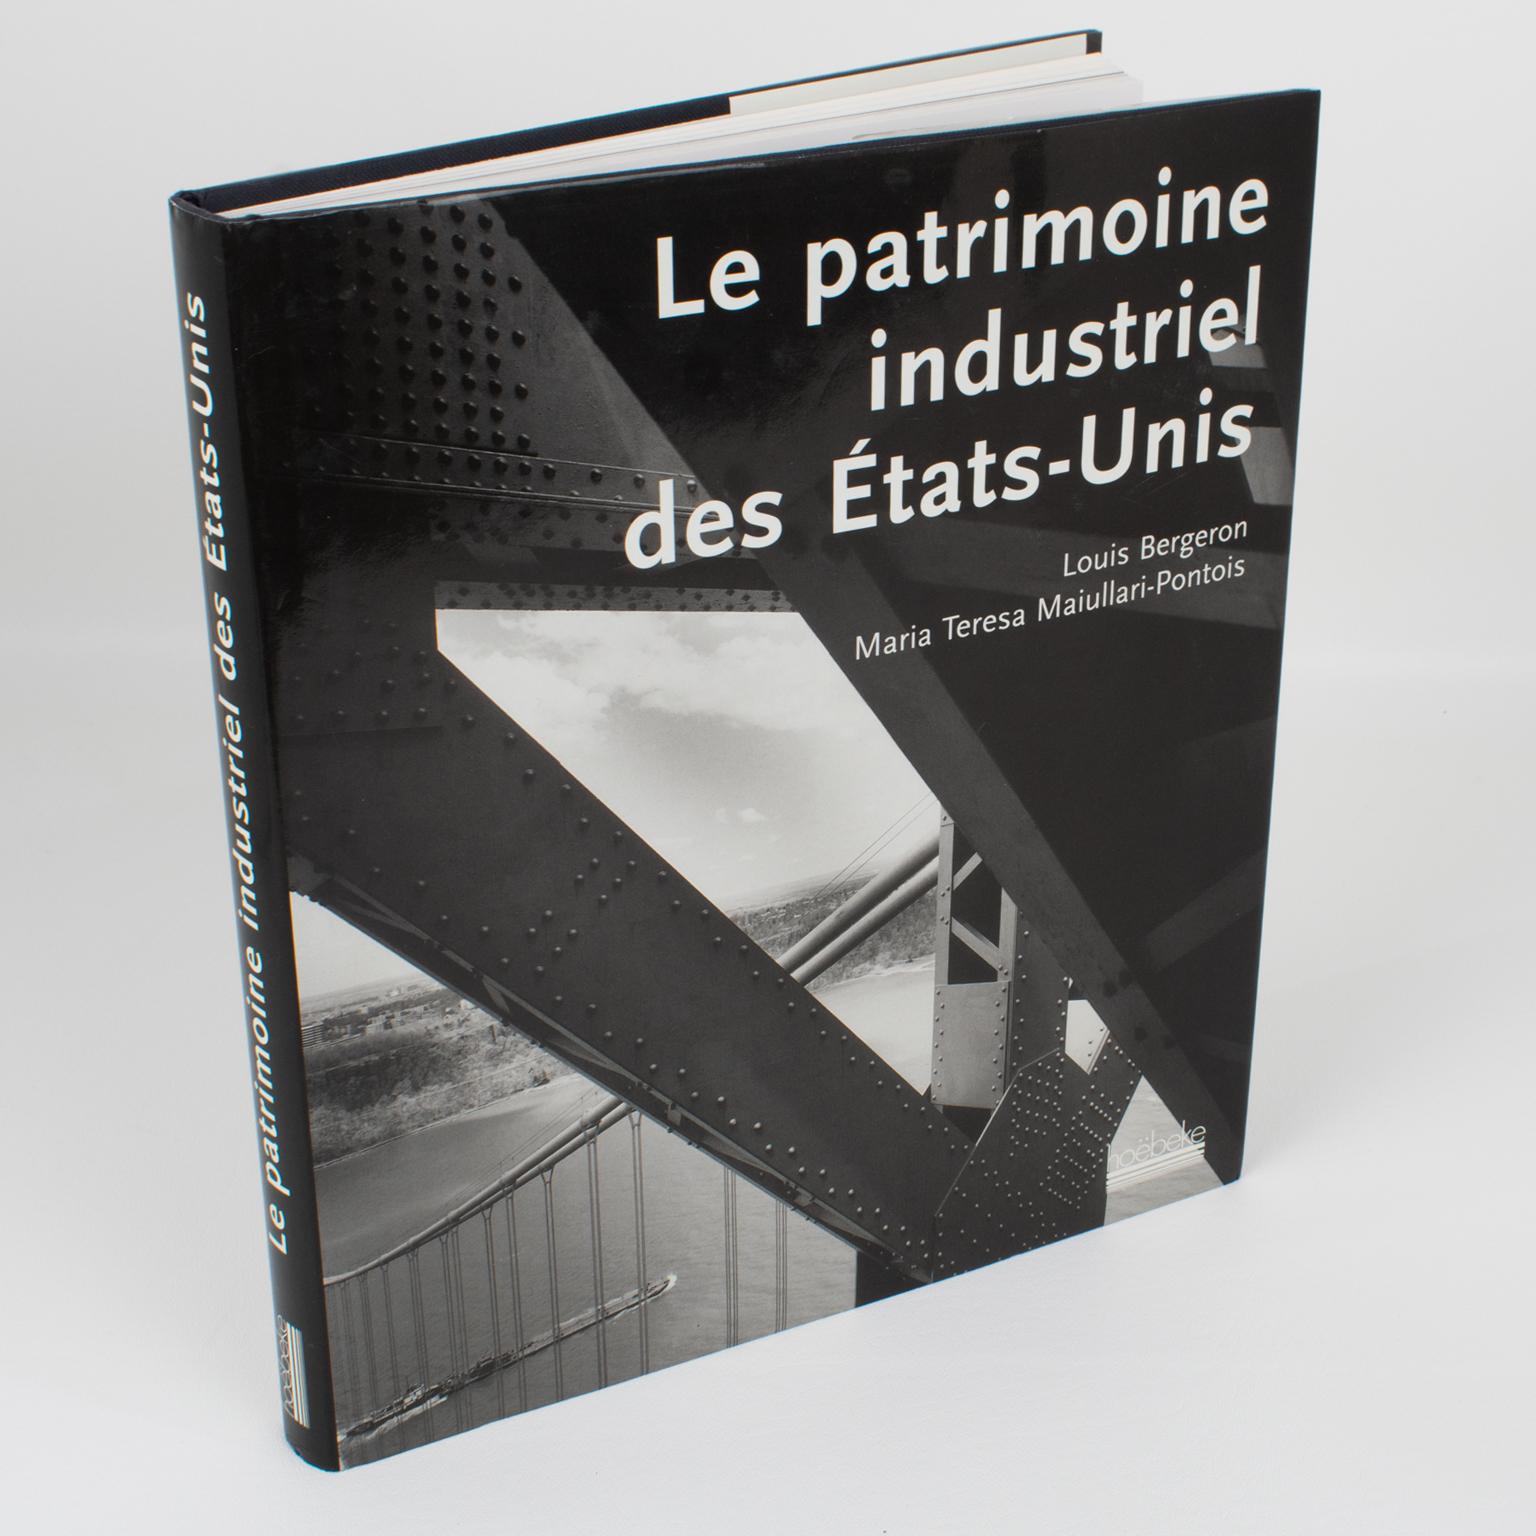 Le Patrimoine Industriel des Etats-Unis (The Industrial Heritage of The United States), French book by Louis Bergeron and Maria Teresa Maiullari-Pontois, 2000.
Since the creation of the United States more than two centuries ago, the American dream,